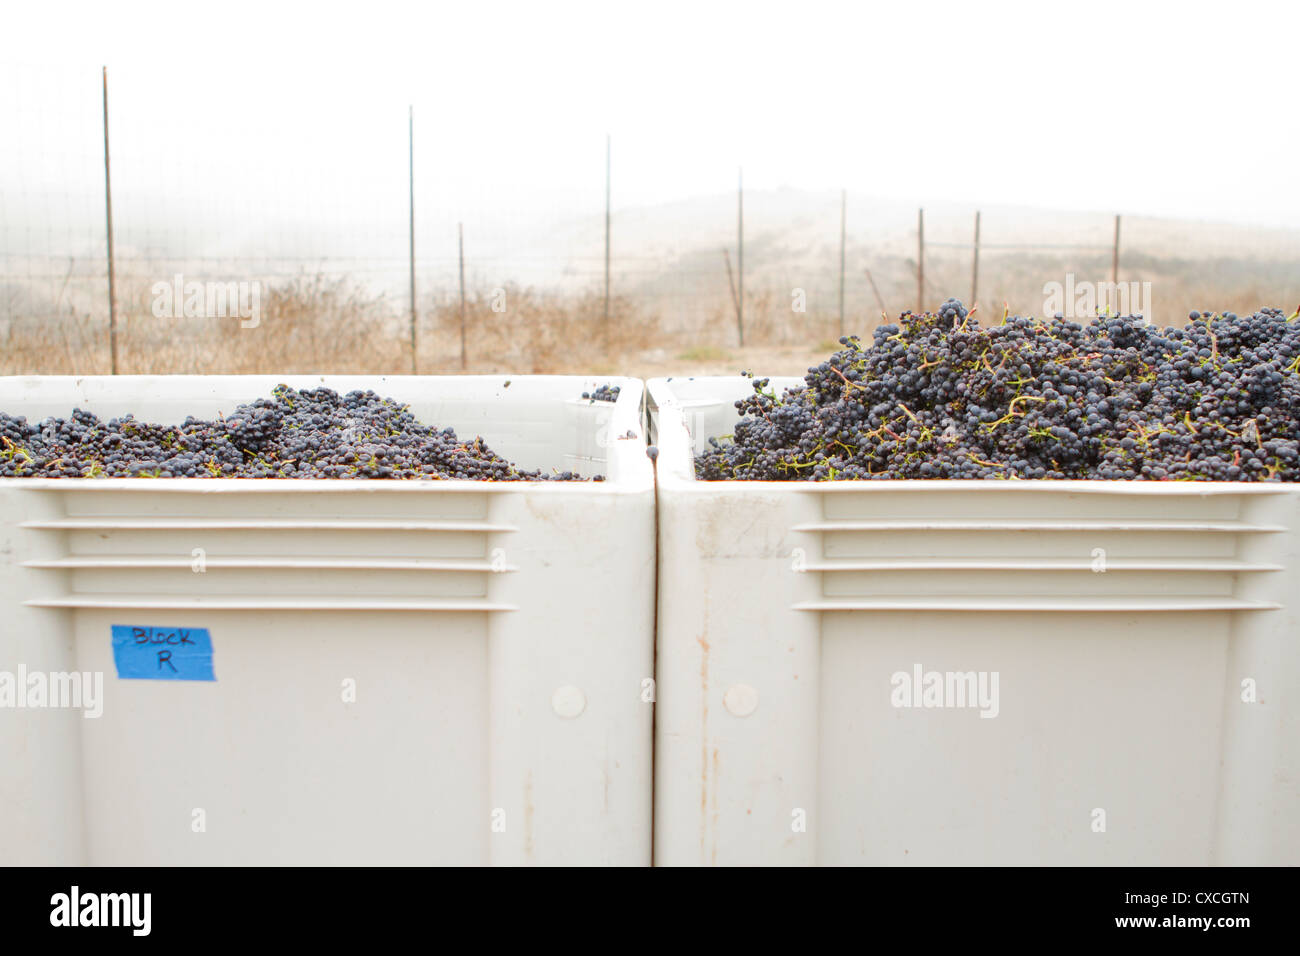 Pinot noir grapes in bins, ready to be shipped for processing. Stock Photo